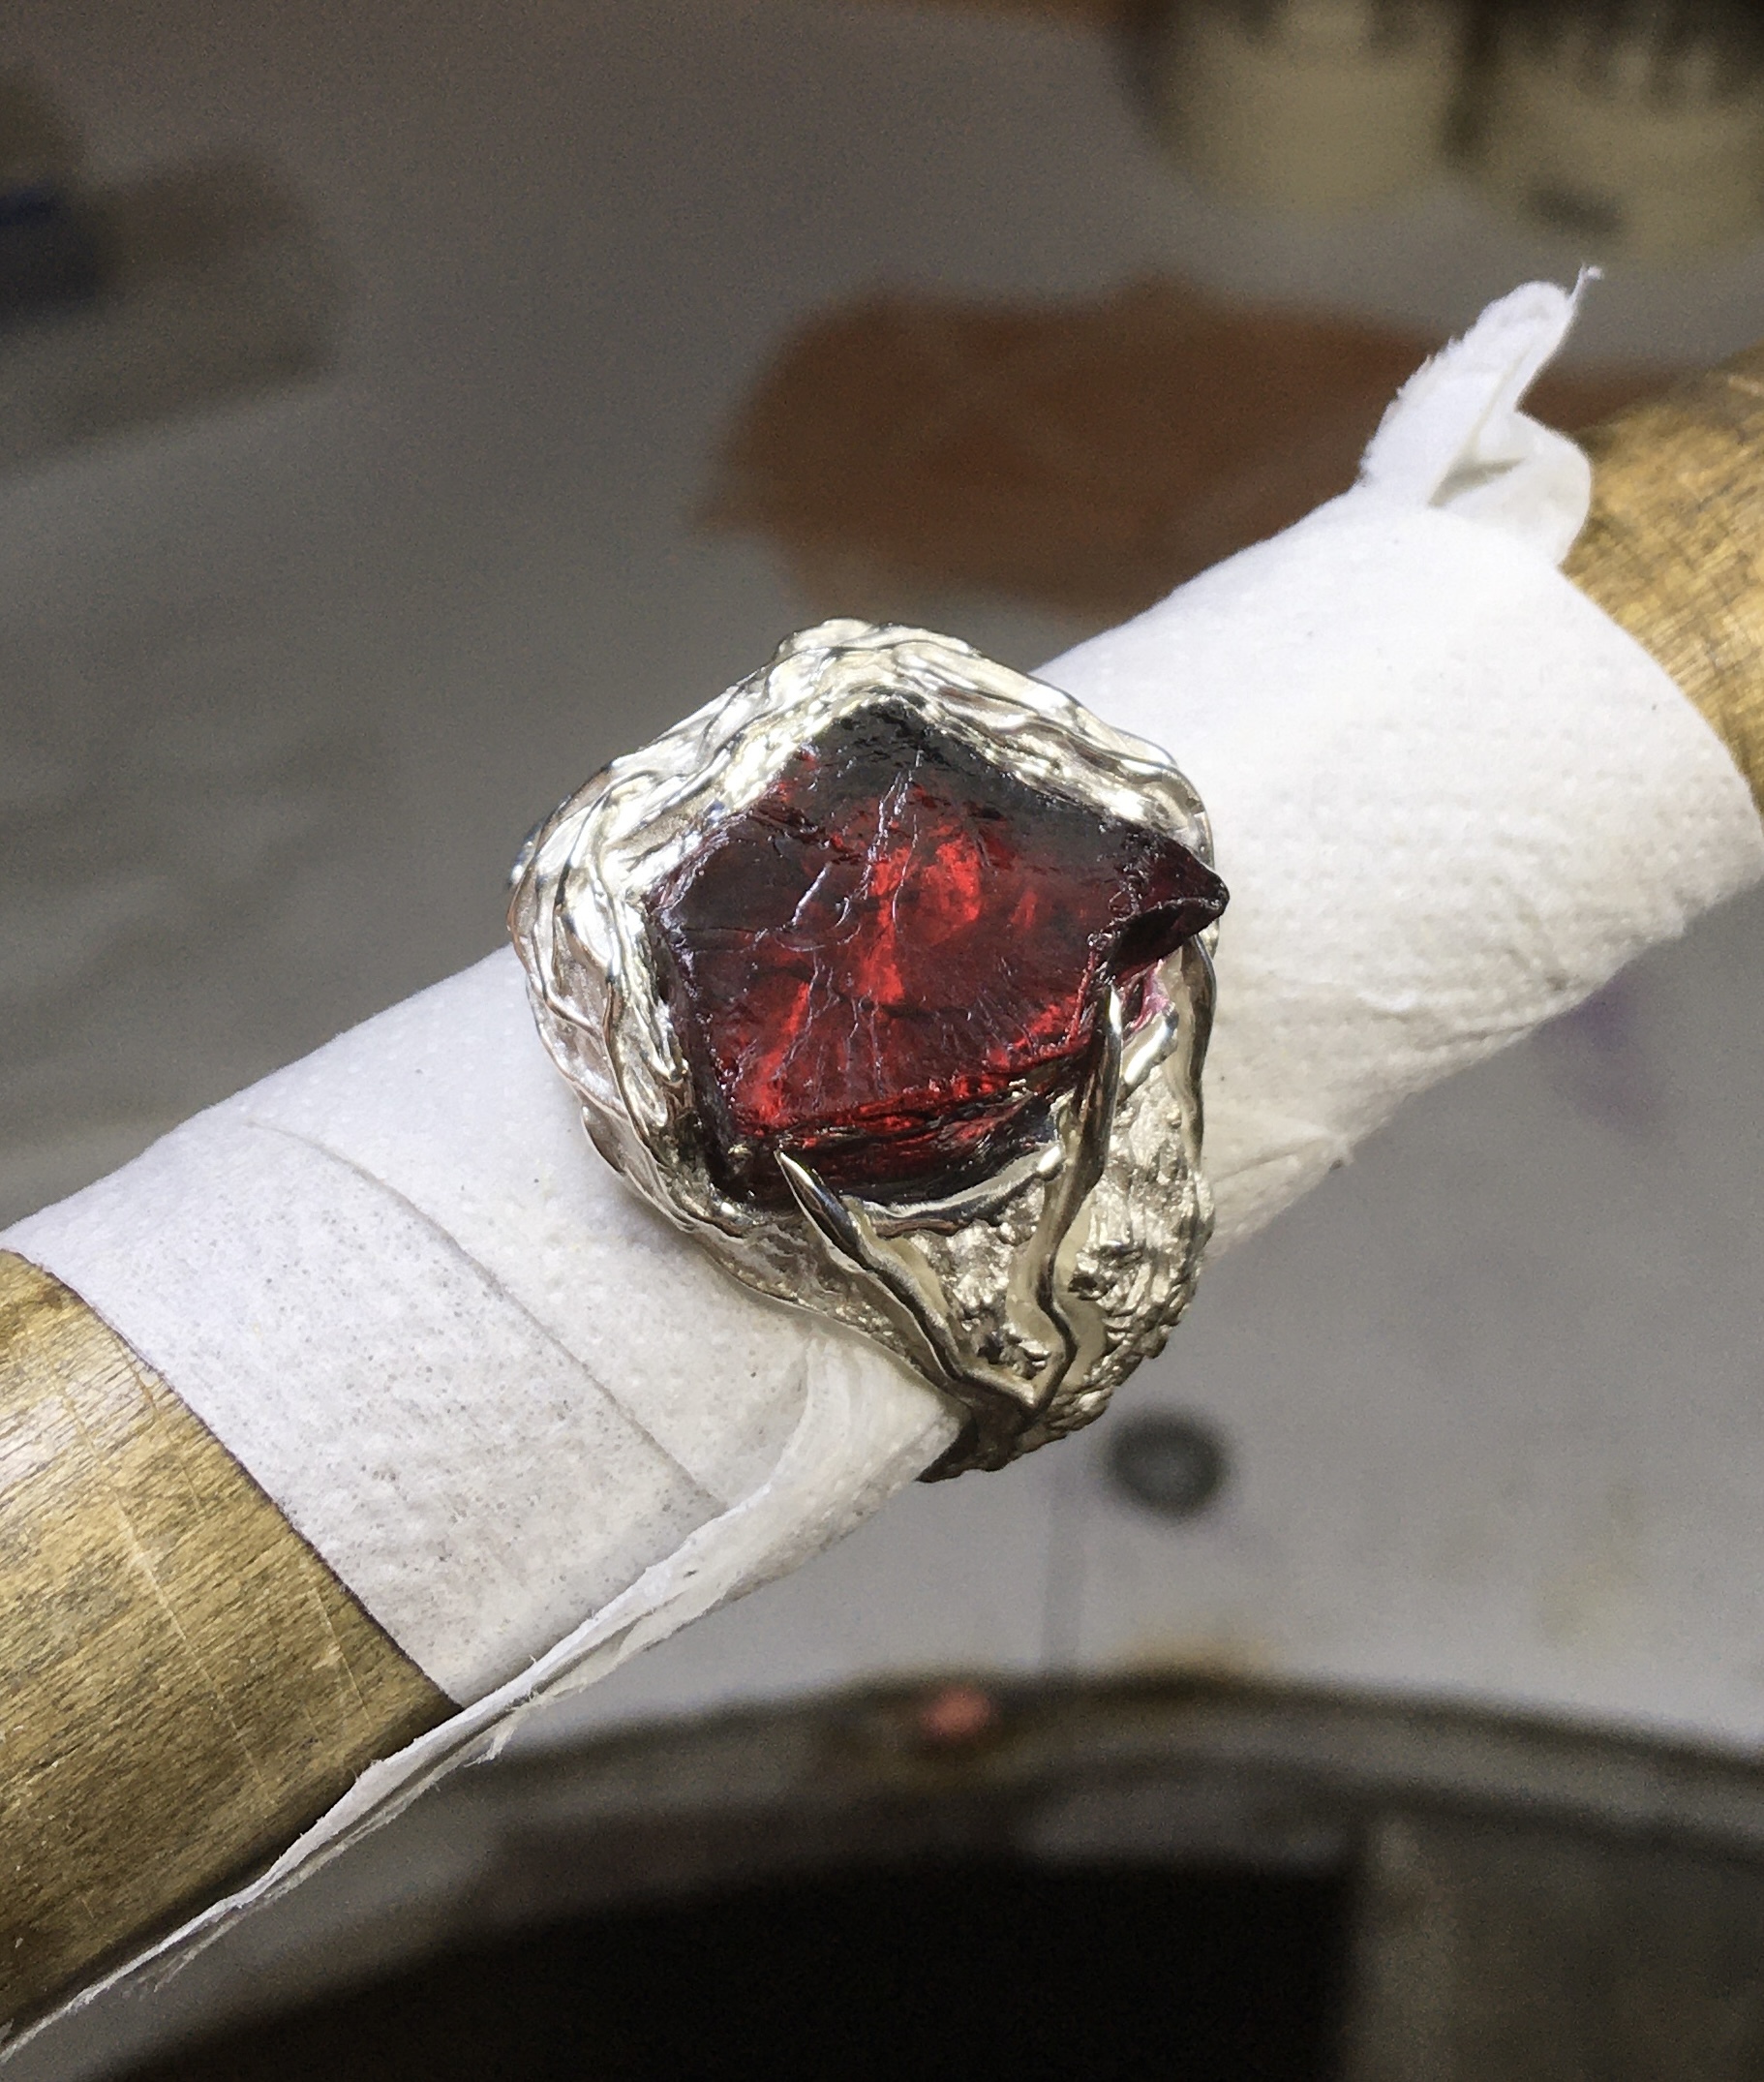 Jewelry underground: Carrion - My, Garnet, Handmade, Ring, Patina, With your own hands, Needlework with process, Casting, Underground, Wax, Mat, Longpost